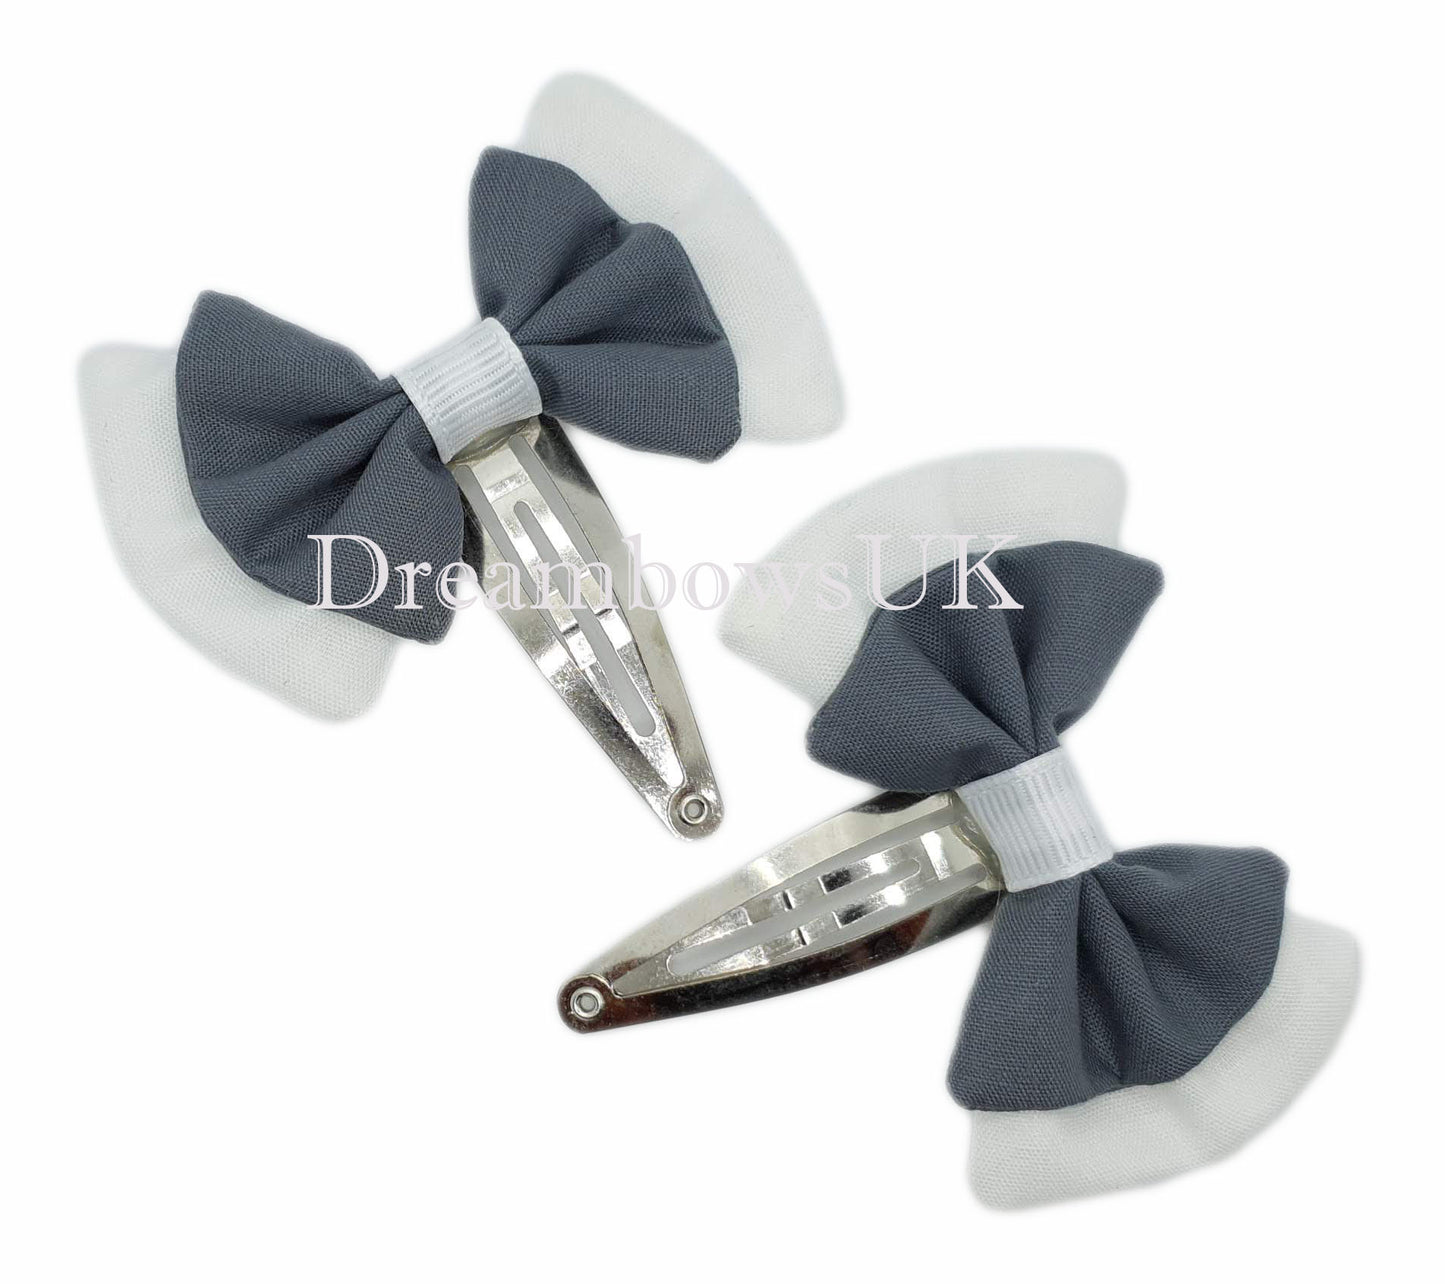 2x Grey and white fabric hair bows